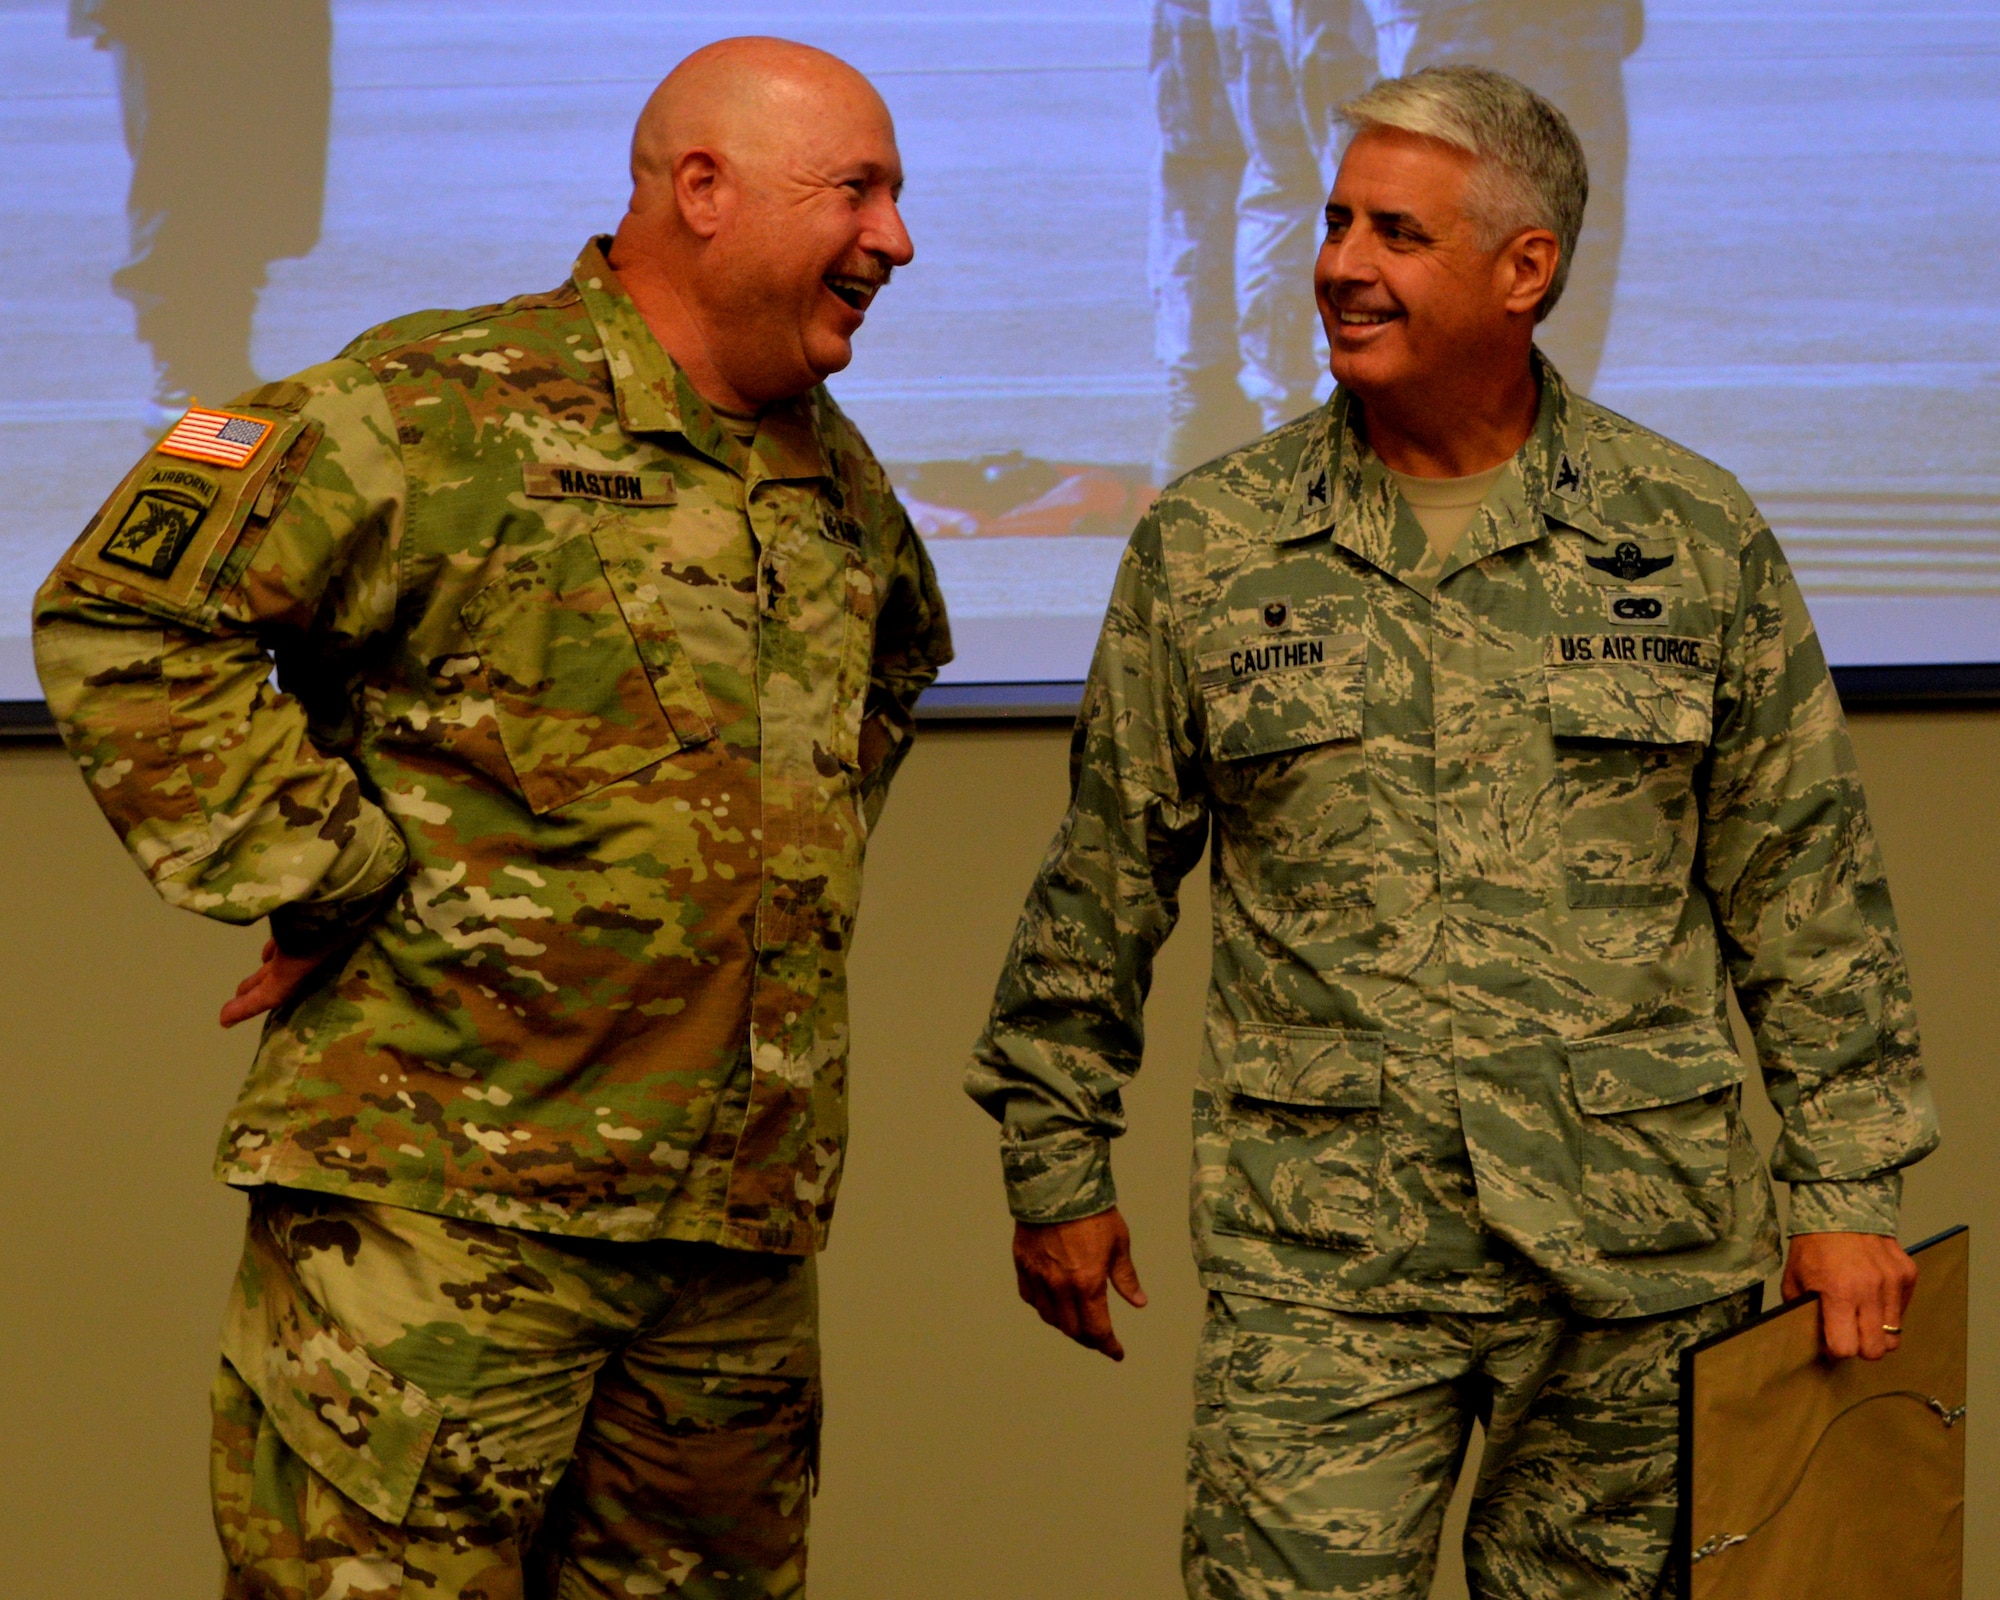 Maj. Gen. Terry M. Haston, the Adjutant General of Tennessee National Guard and Col. Thomas Cauthen, 134th Air Refueling Wing Commander talk while visiting the 134th Operations Group July 27, 2016 at McGhee Tyson ANG Base, Knoxville, Tenn. (U.S. Air National Guard photo by Staff Sgt. Daniel Gagnon)